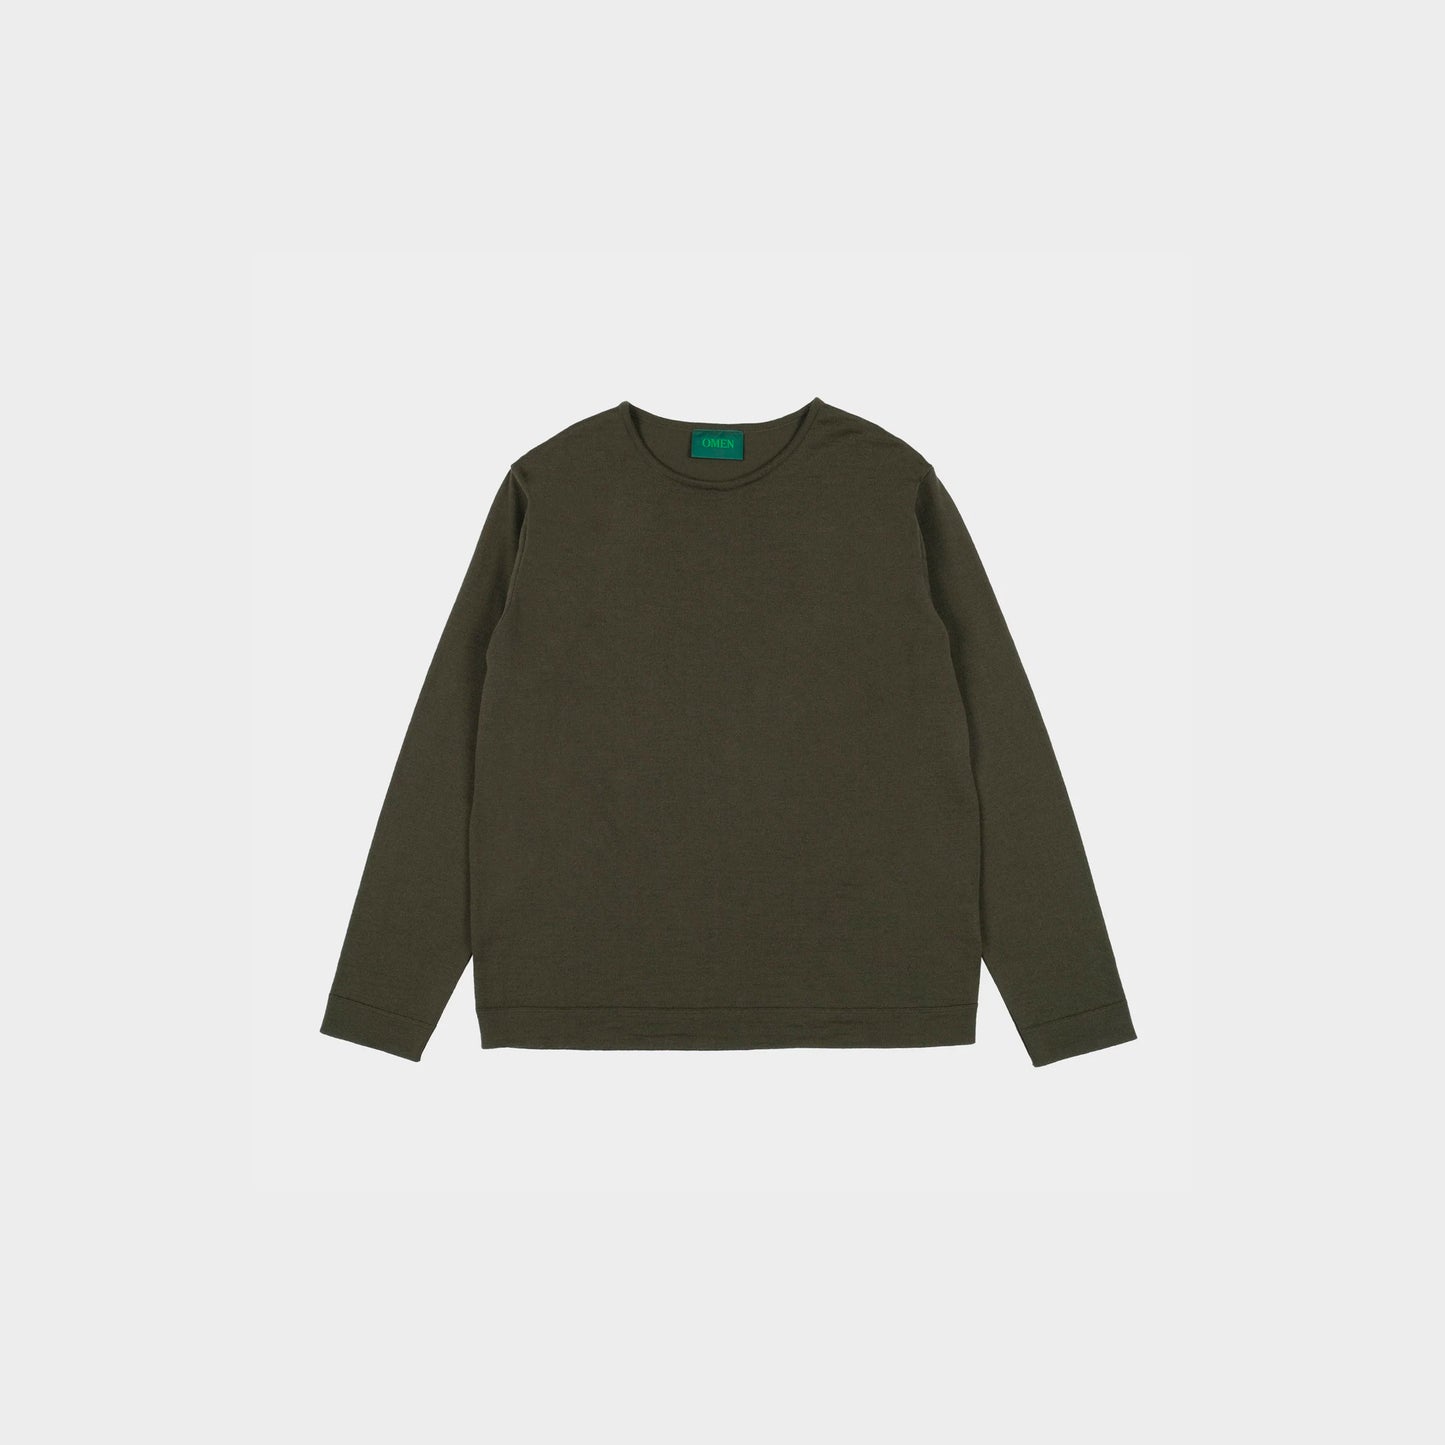 OMEN Pullover Michael RL in Farbe army